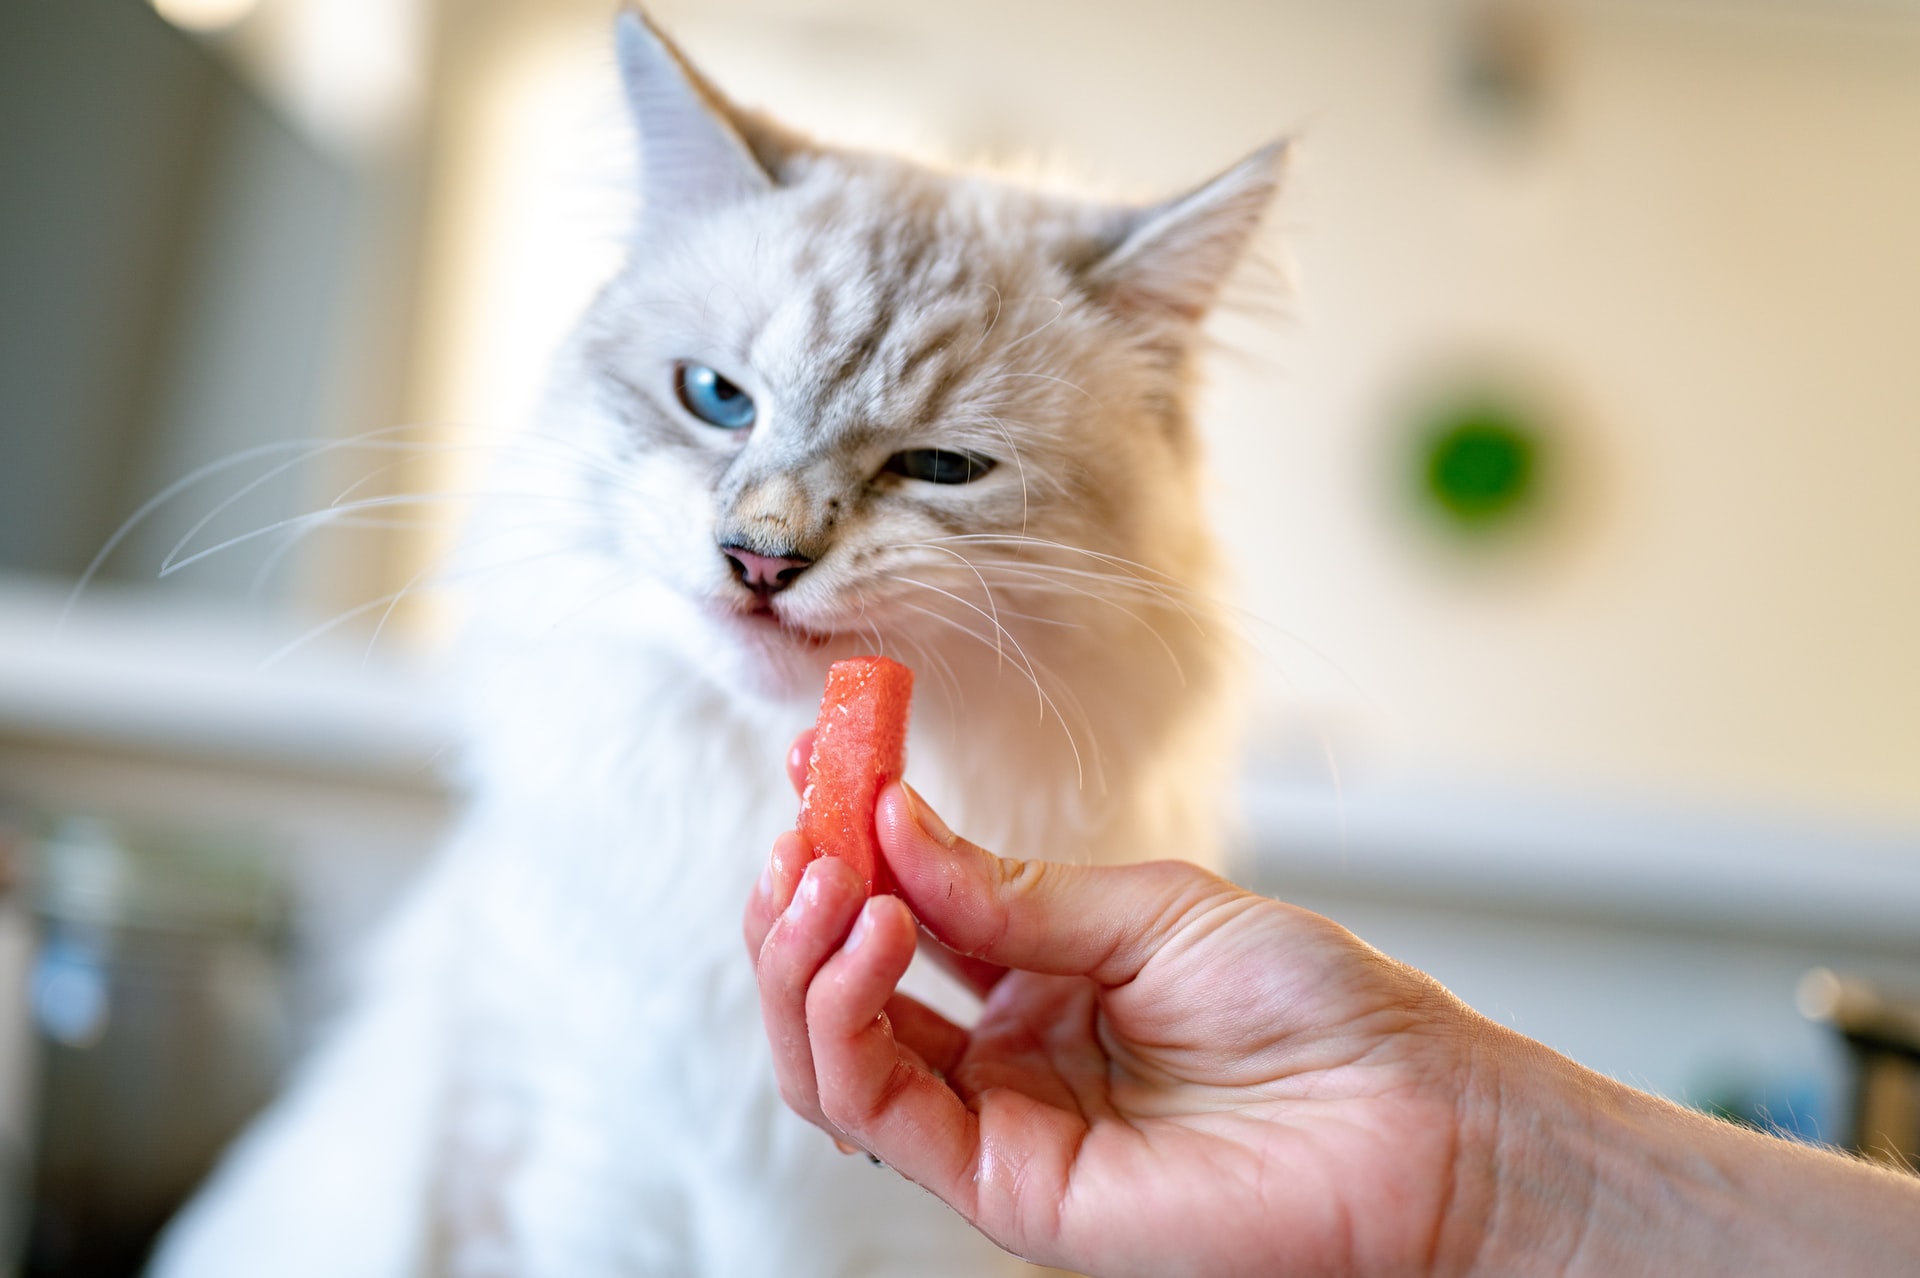 A white cat wrinkling its nose at a piece of watermelon.